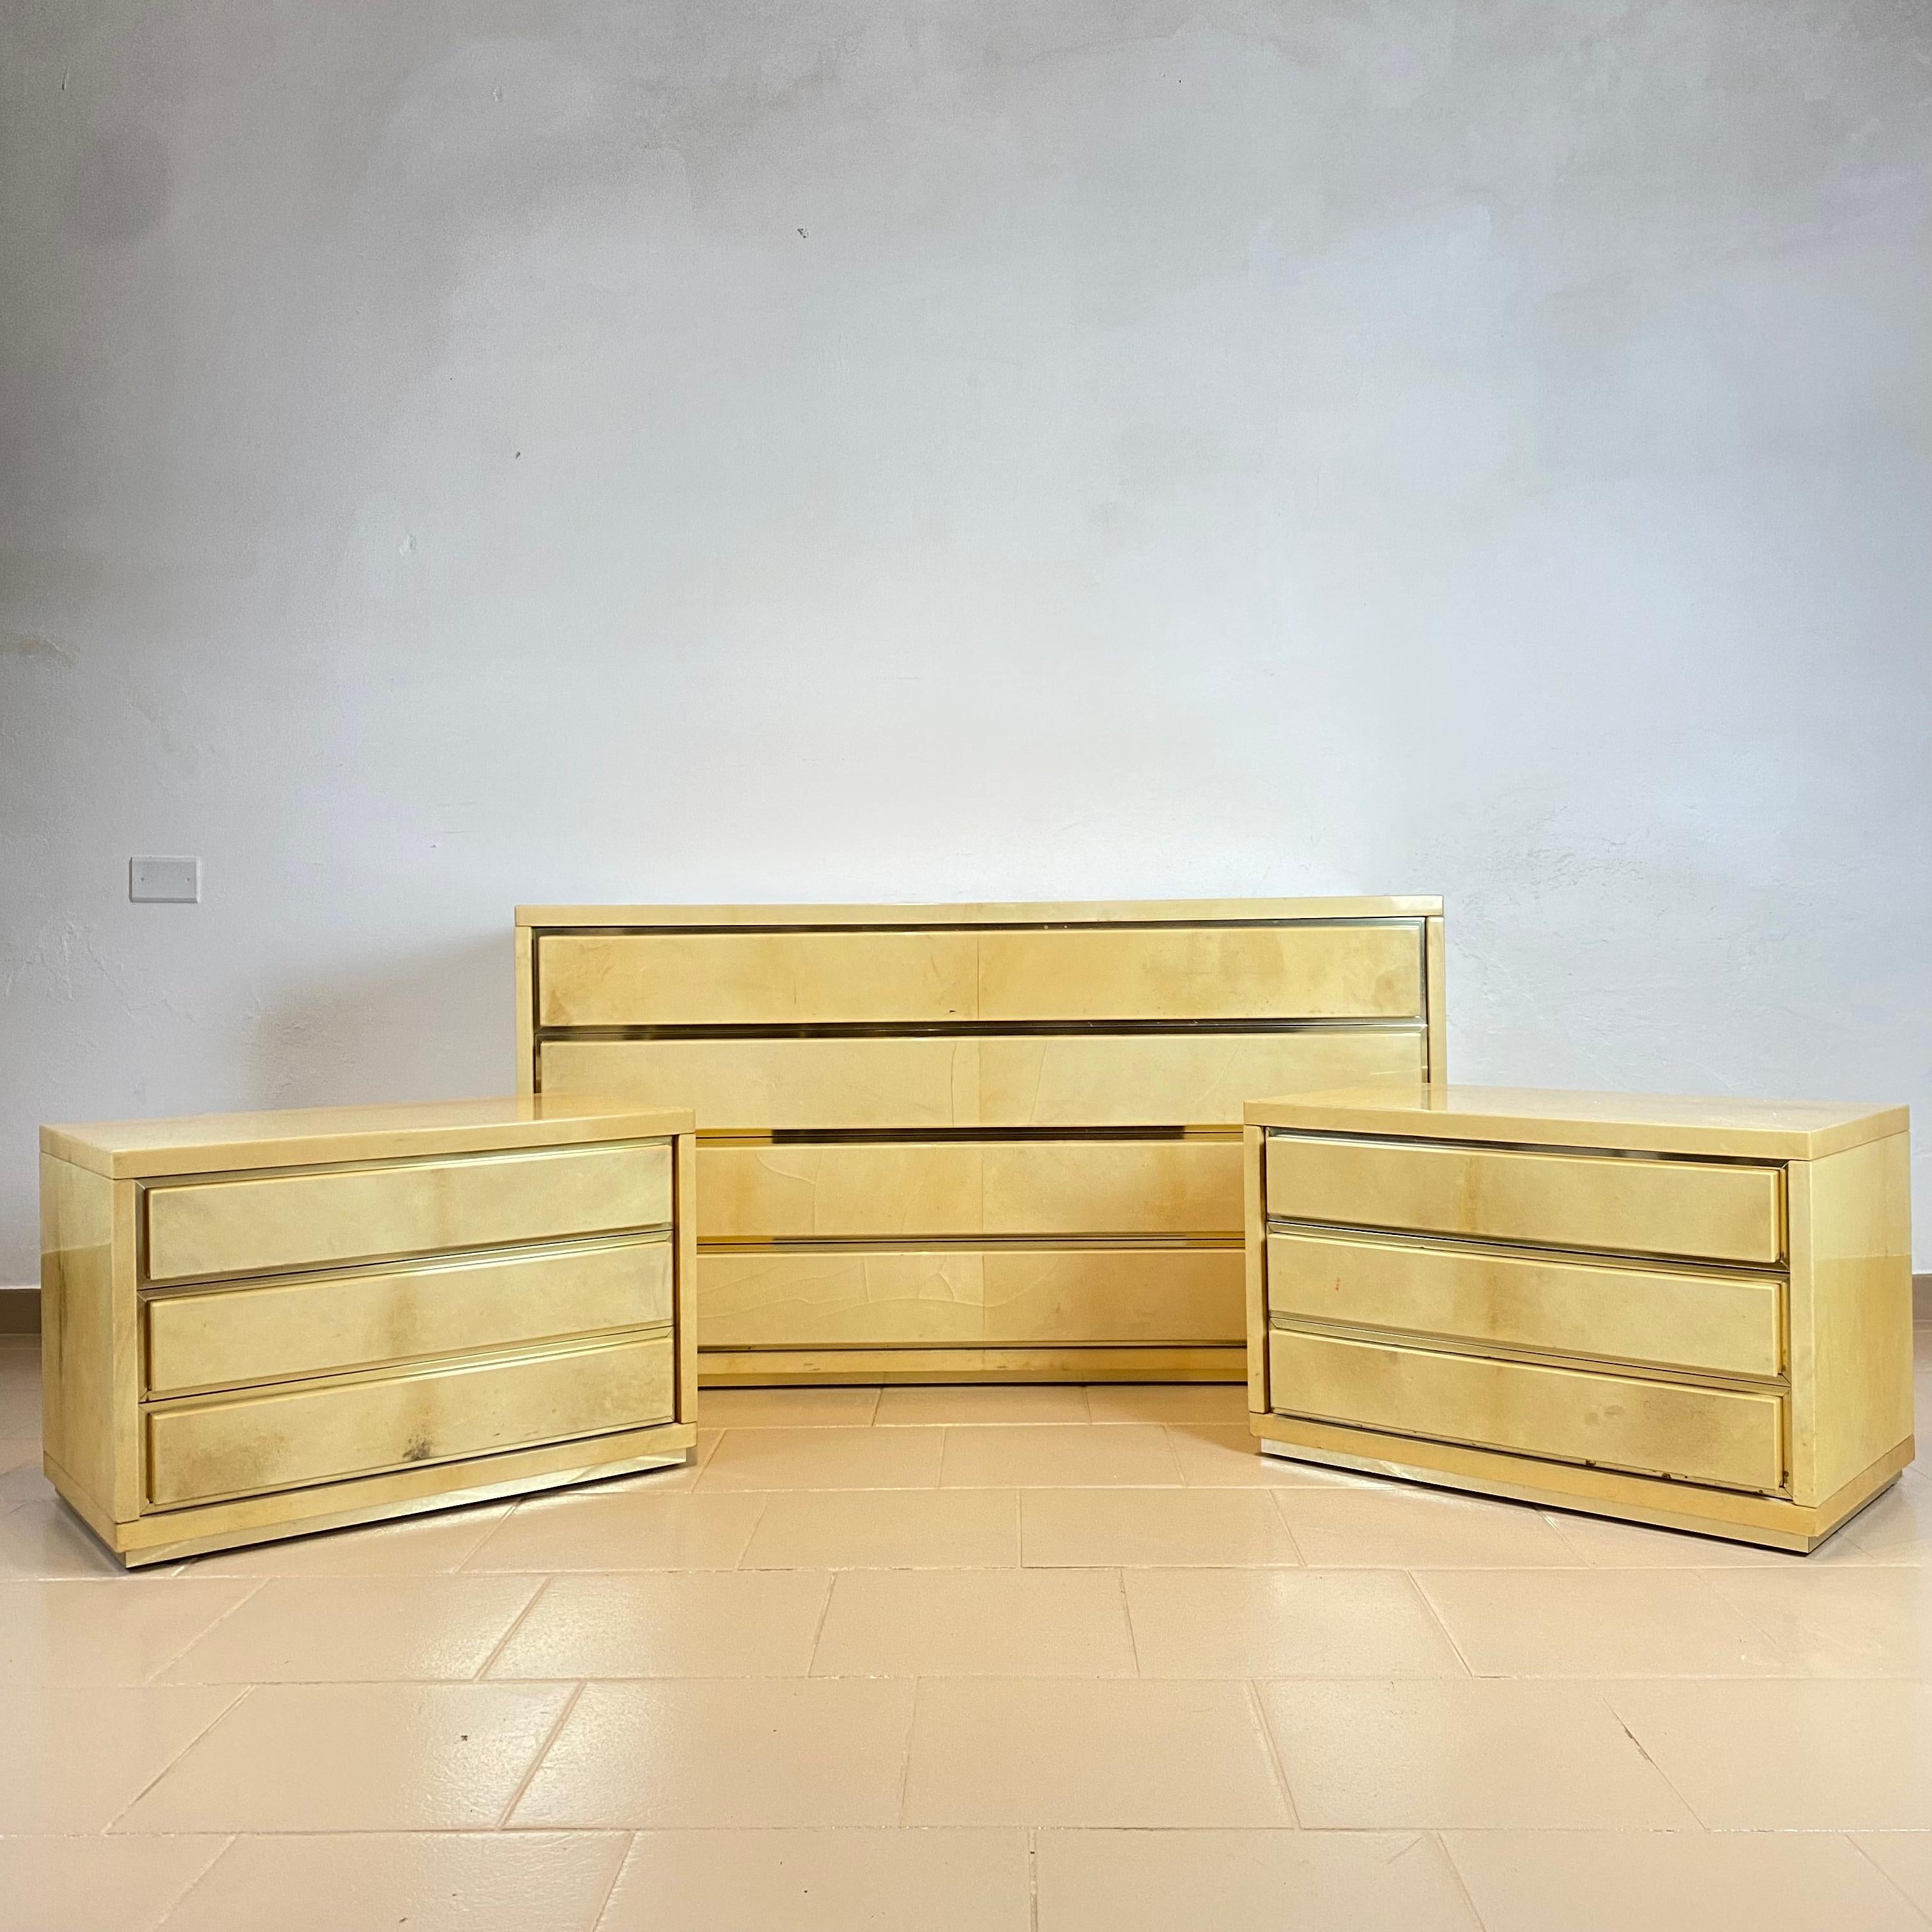 Aldo Tura chest of drawers and a pair of nightstands in Parchment and Brass, Italy 1960s.
 
Elegant Aldo Tura's Chest of Drawers with four drawers and a pair of Luxurious Nightstands with three drawers completly made in light skin Parchment and